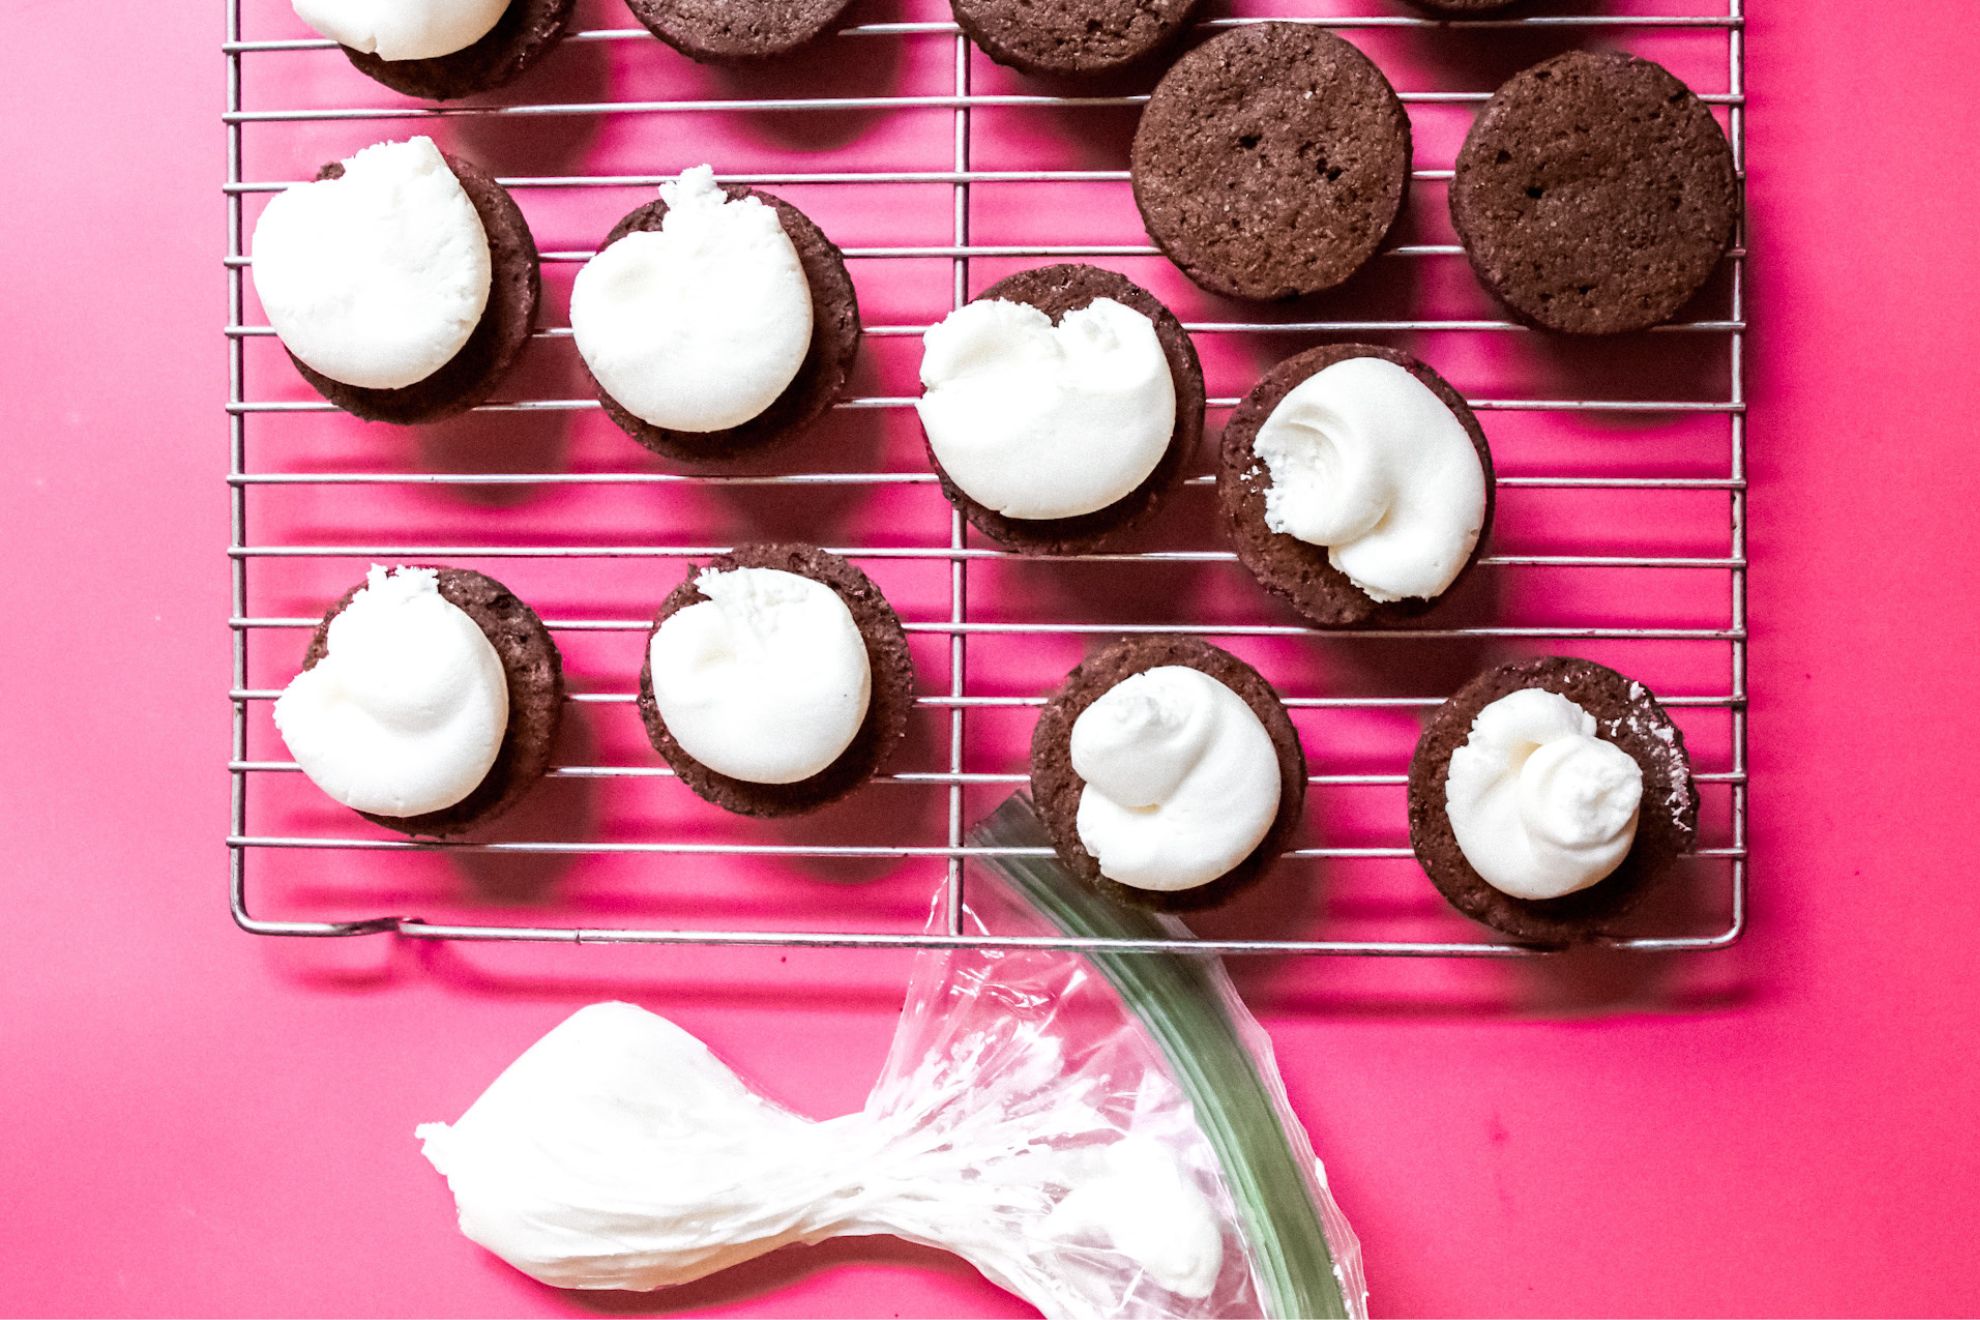 This is an overhead horizontal image of a silver cooling rack on a dark pink surface. On the cooling rack are chocolate circle cookies. Half of the cookies have vanilla icing piped out on the center. To the bottom center of the image of a plastic baggie with vanilla frosting in it.